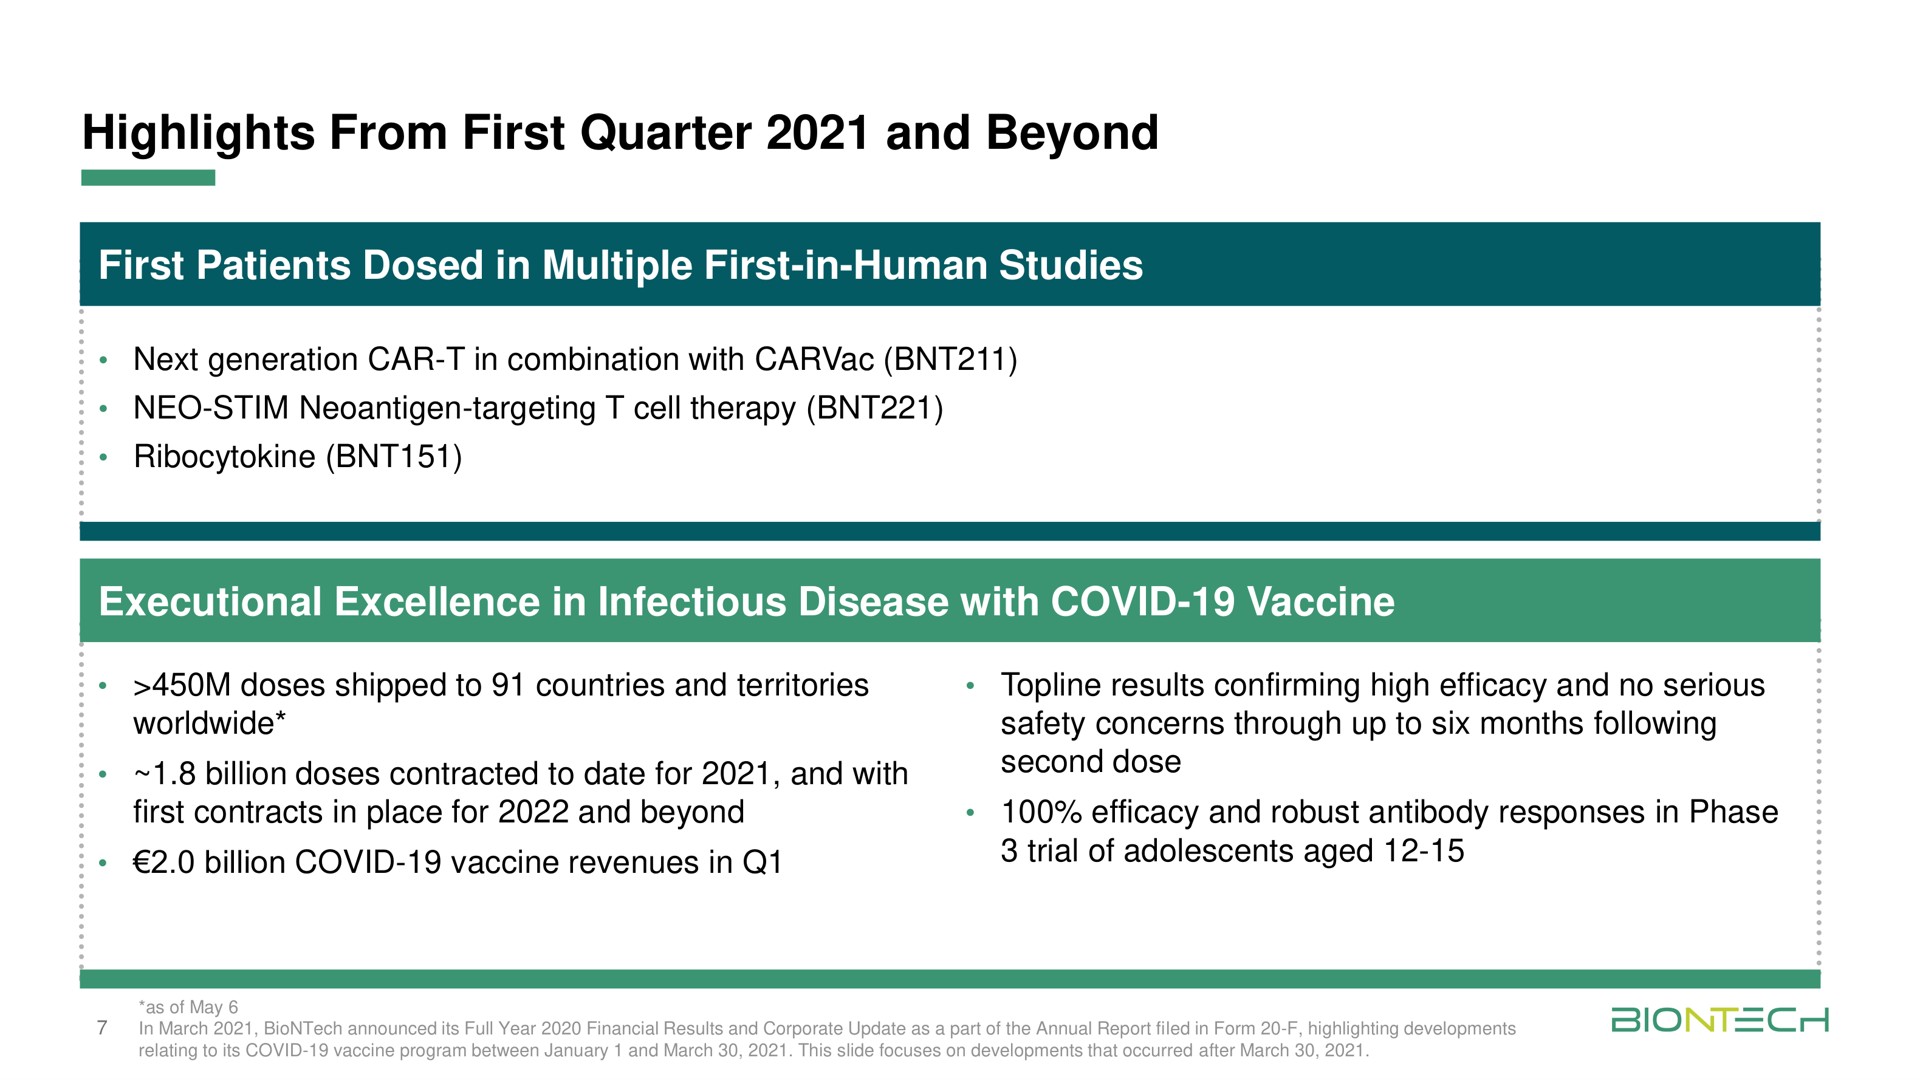 highlights from first quarter and beyond first patients dosed in multiple first in human studies executional excellence in infectious disease with covid vaccine | BioNTech